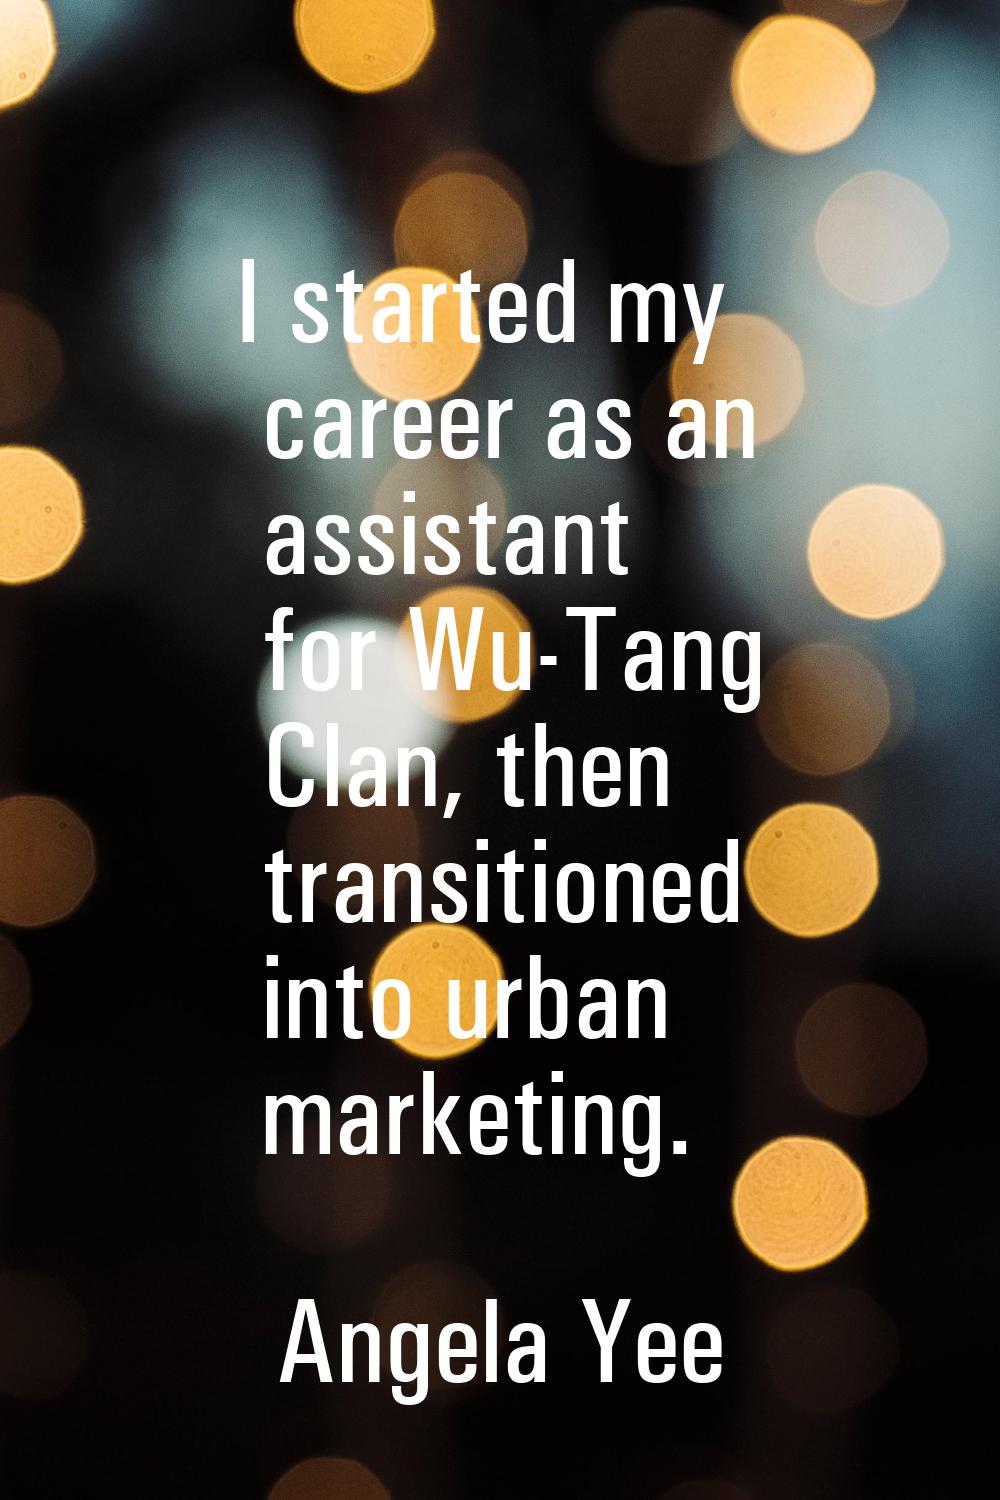 I started my career as an assistant for Wu-Tang Clan, then transitioned into urban marketing.